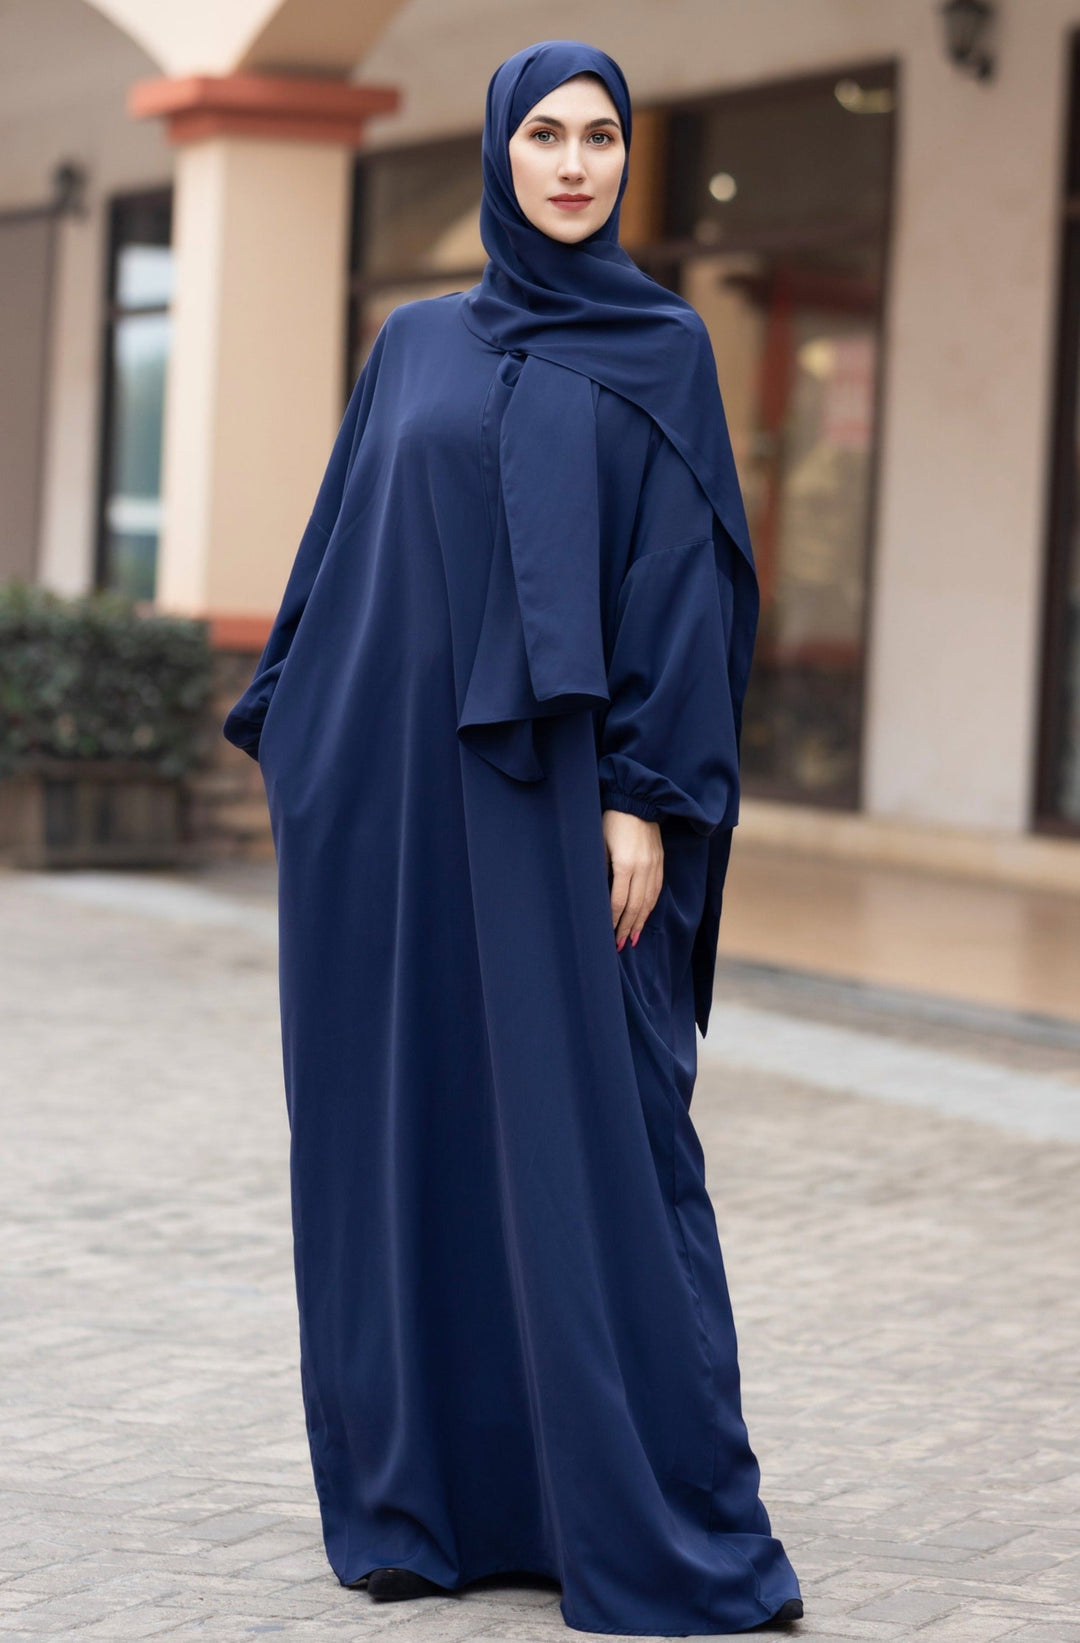 Urban Modesty - Wrap One Piece Salah Prayer Outfit (More colors available)